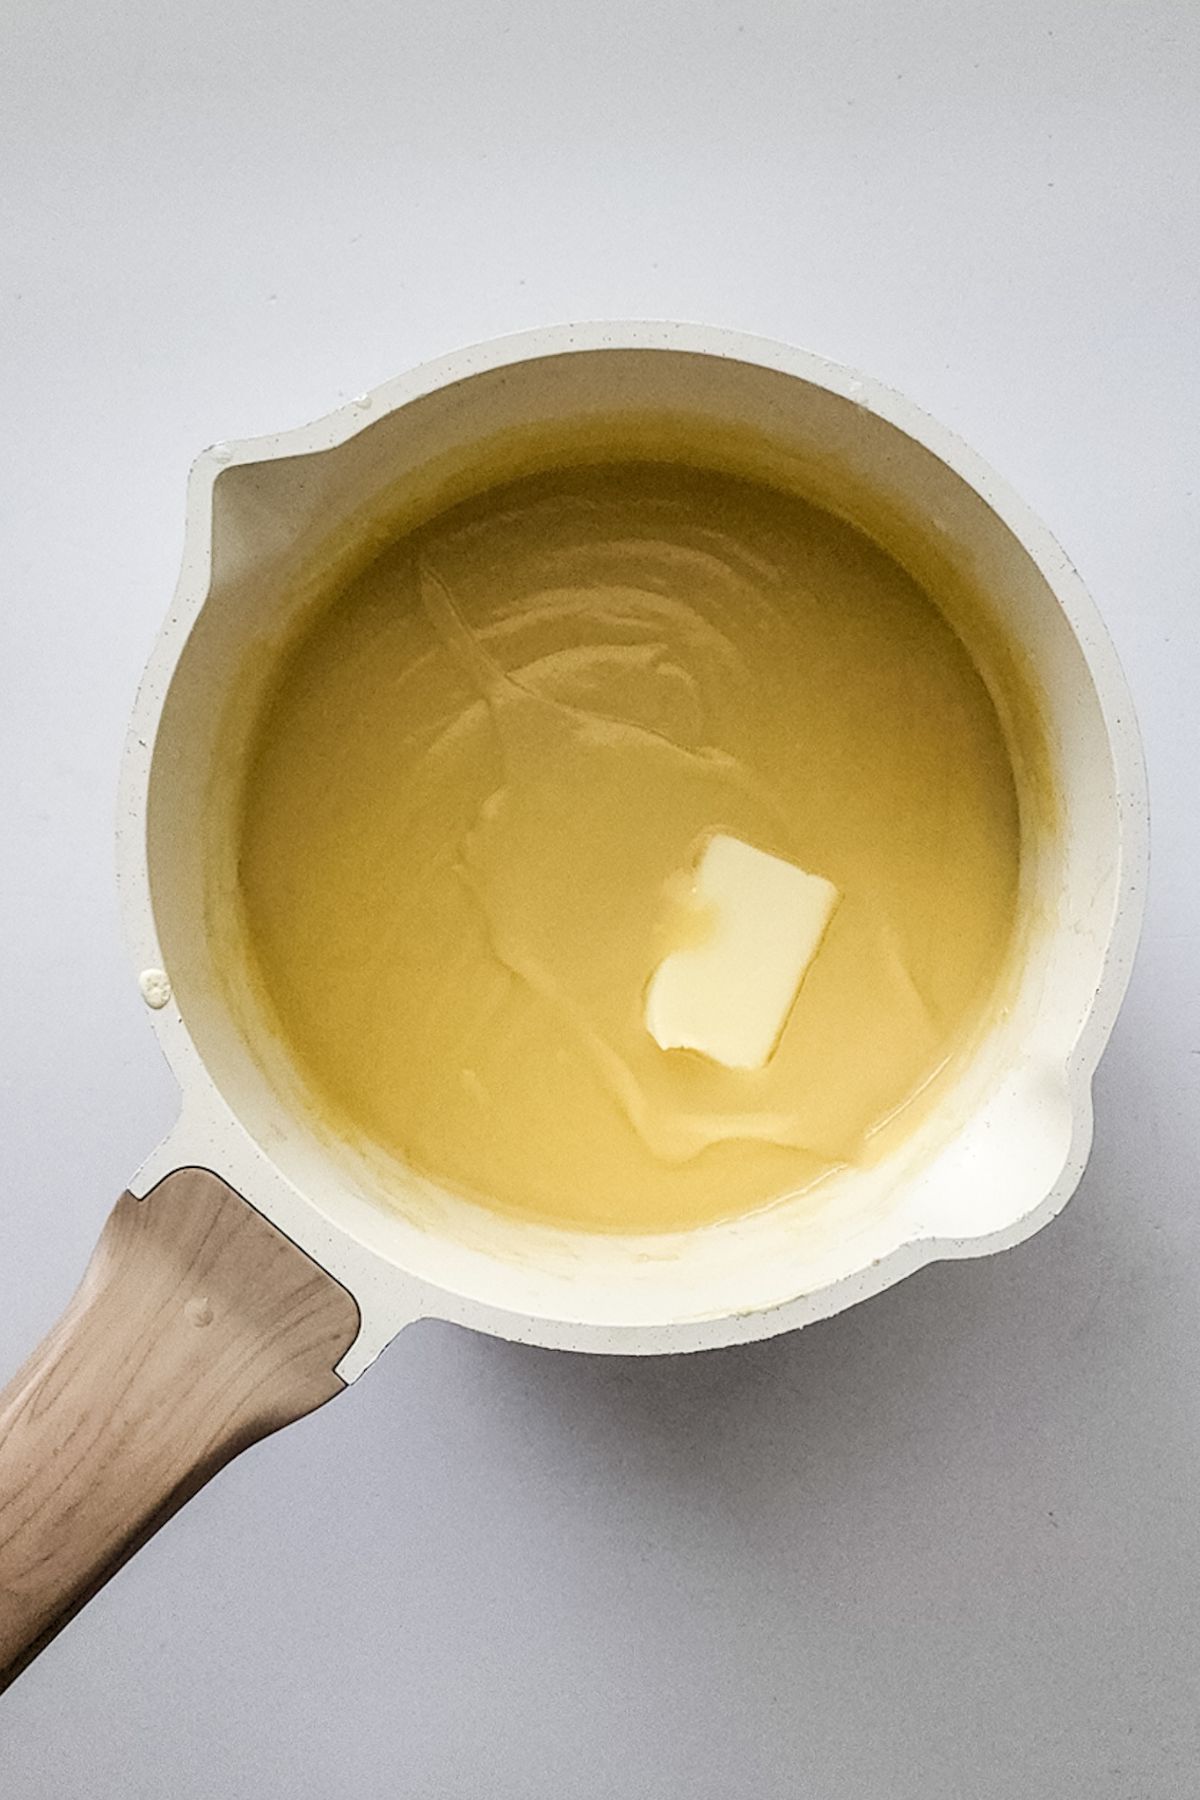 Custard mix with butter in the pan.